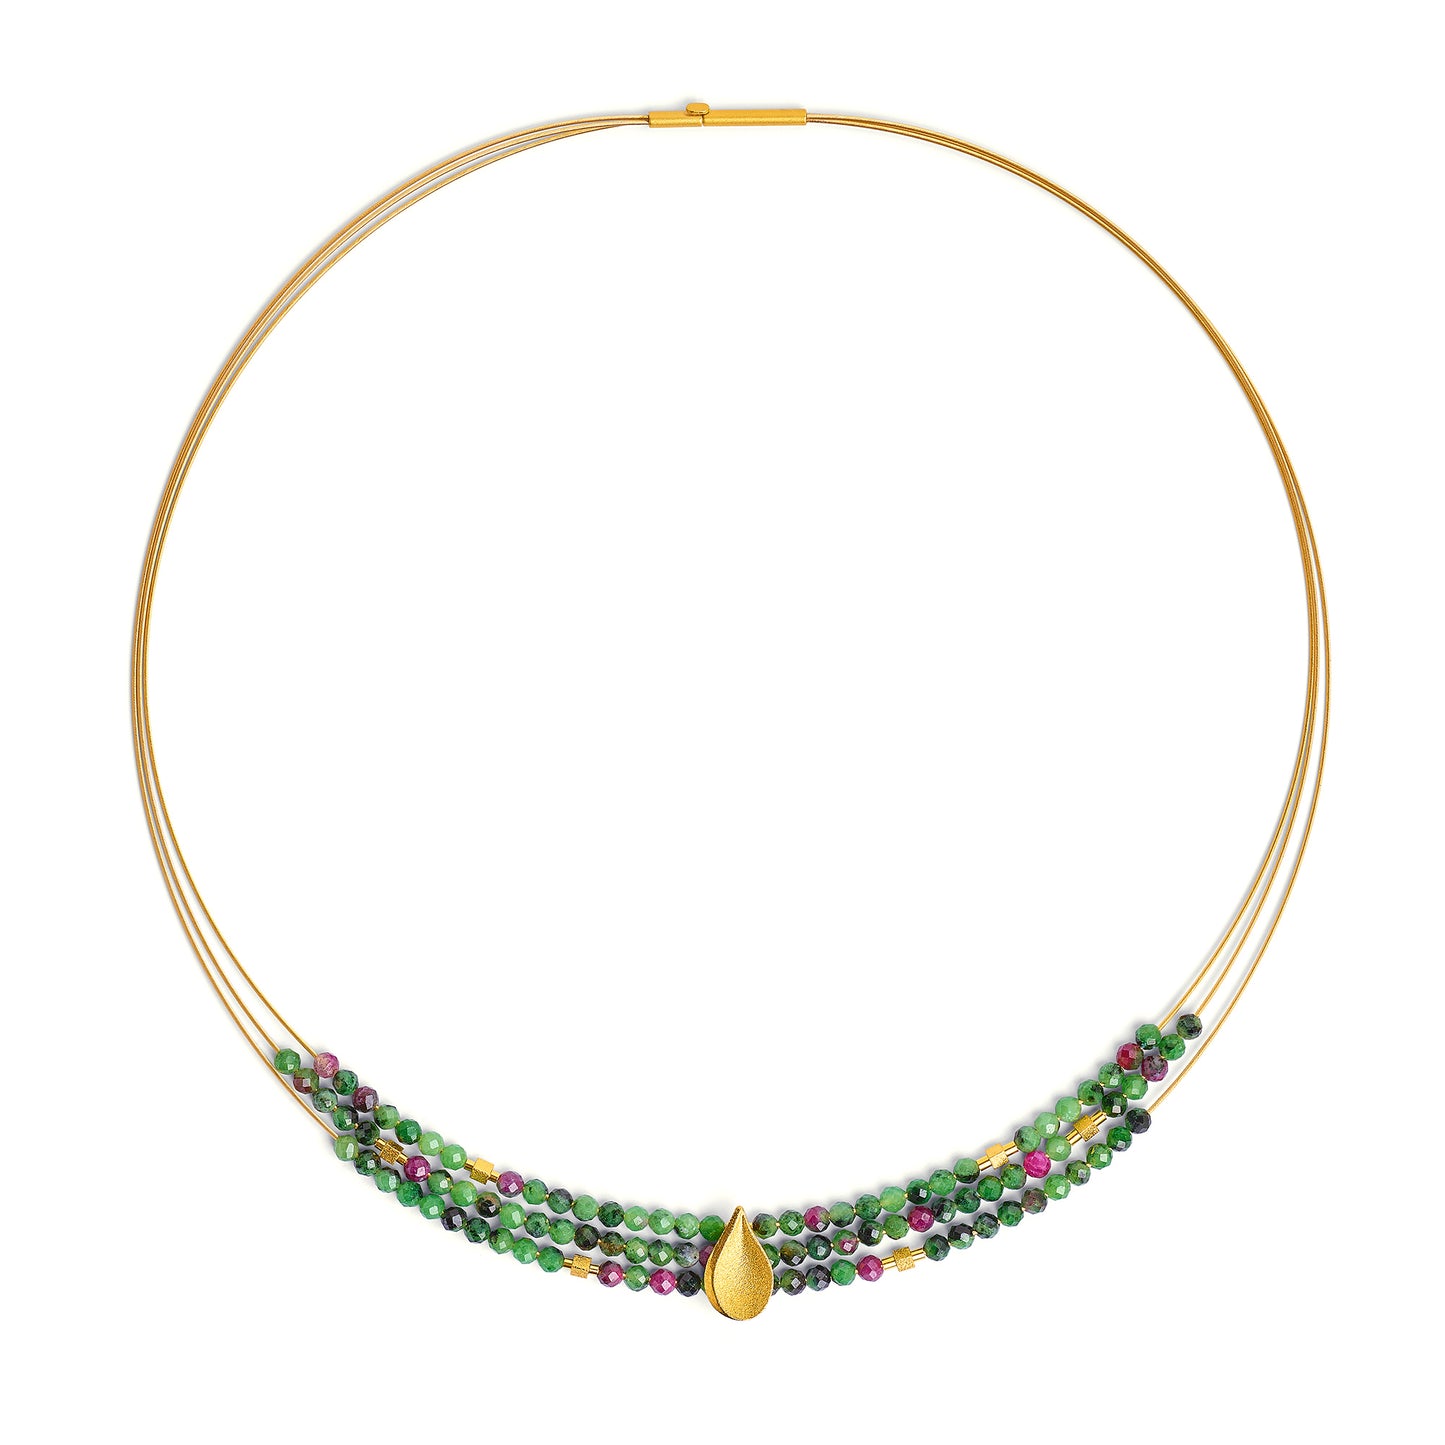 Bernd Wolf Collection "Aquinsa" Ruby Zoisite Necklace